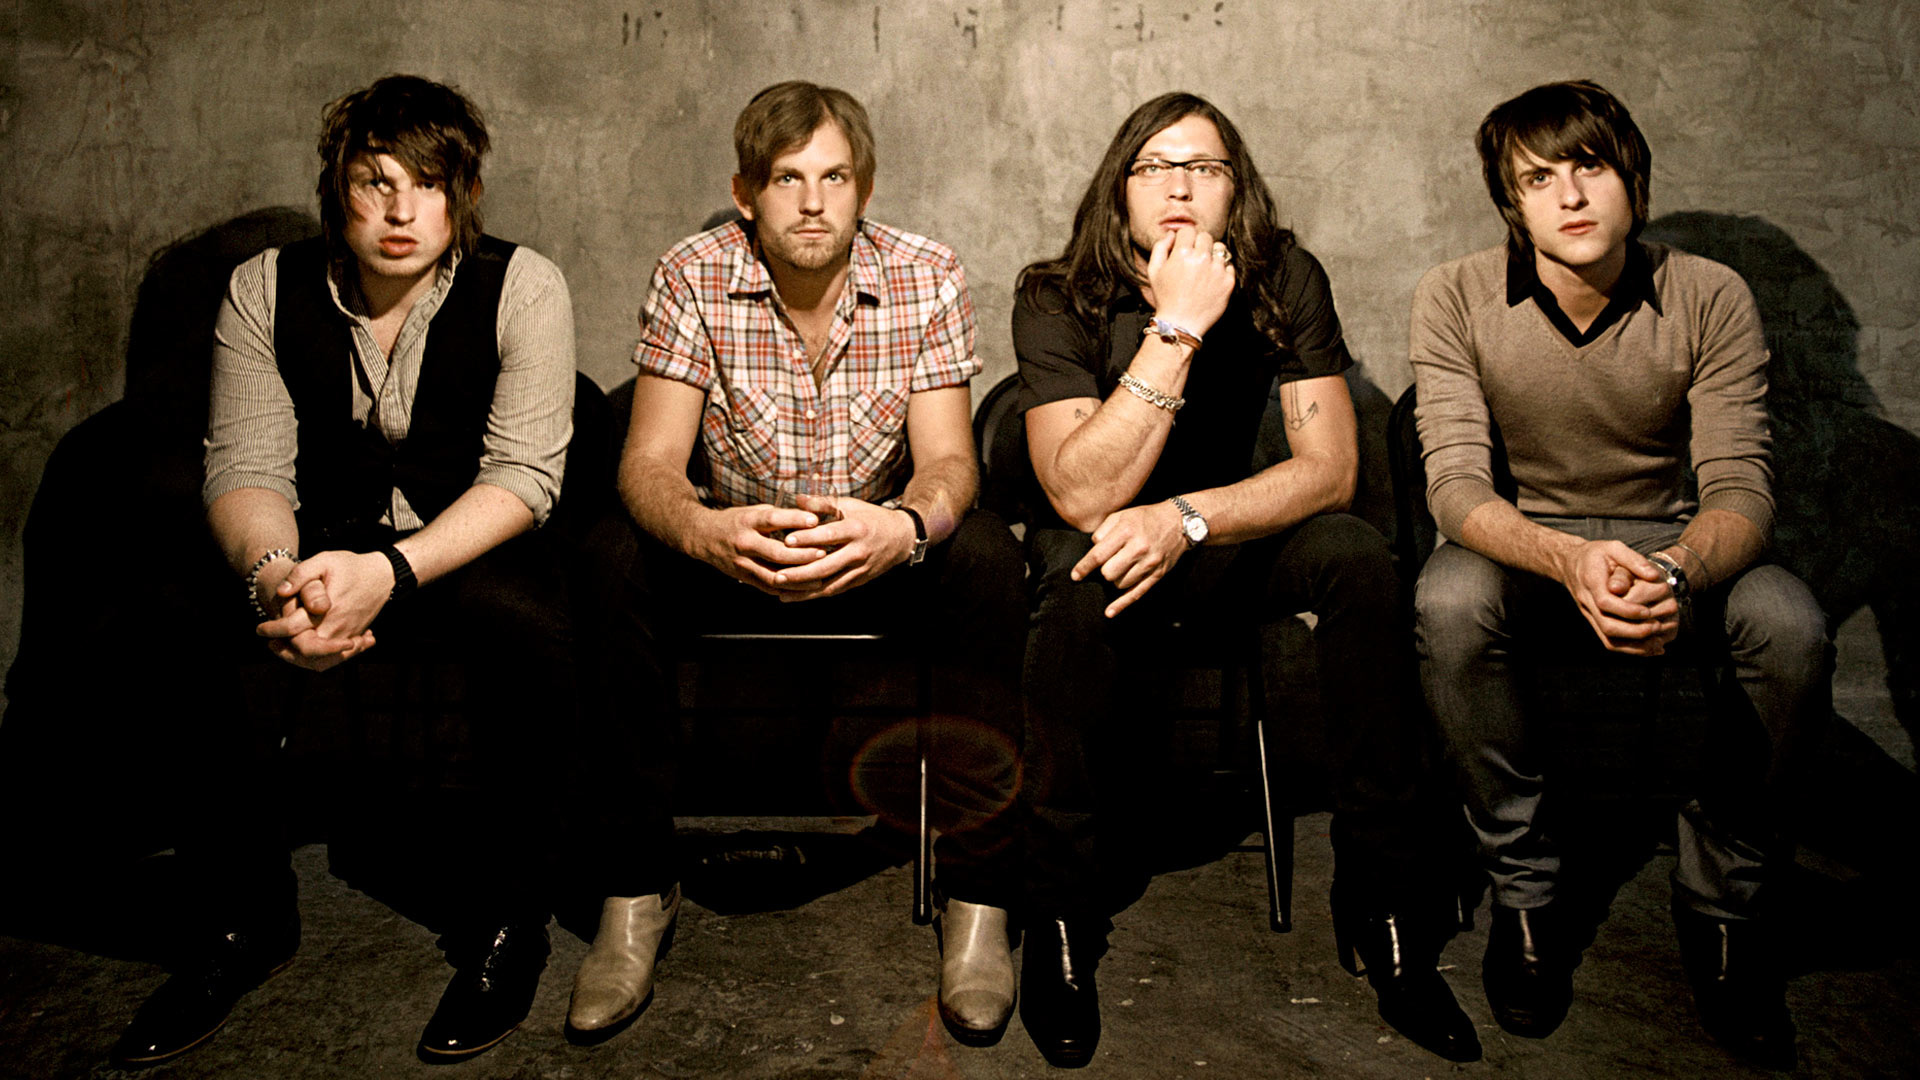 Kings of Leon, Music band, High-quality pictures, 4K wallpapers, 1920x1080 Full HD Desktop